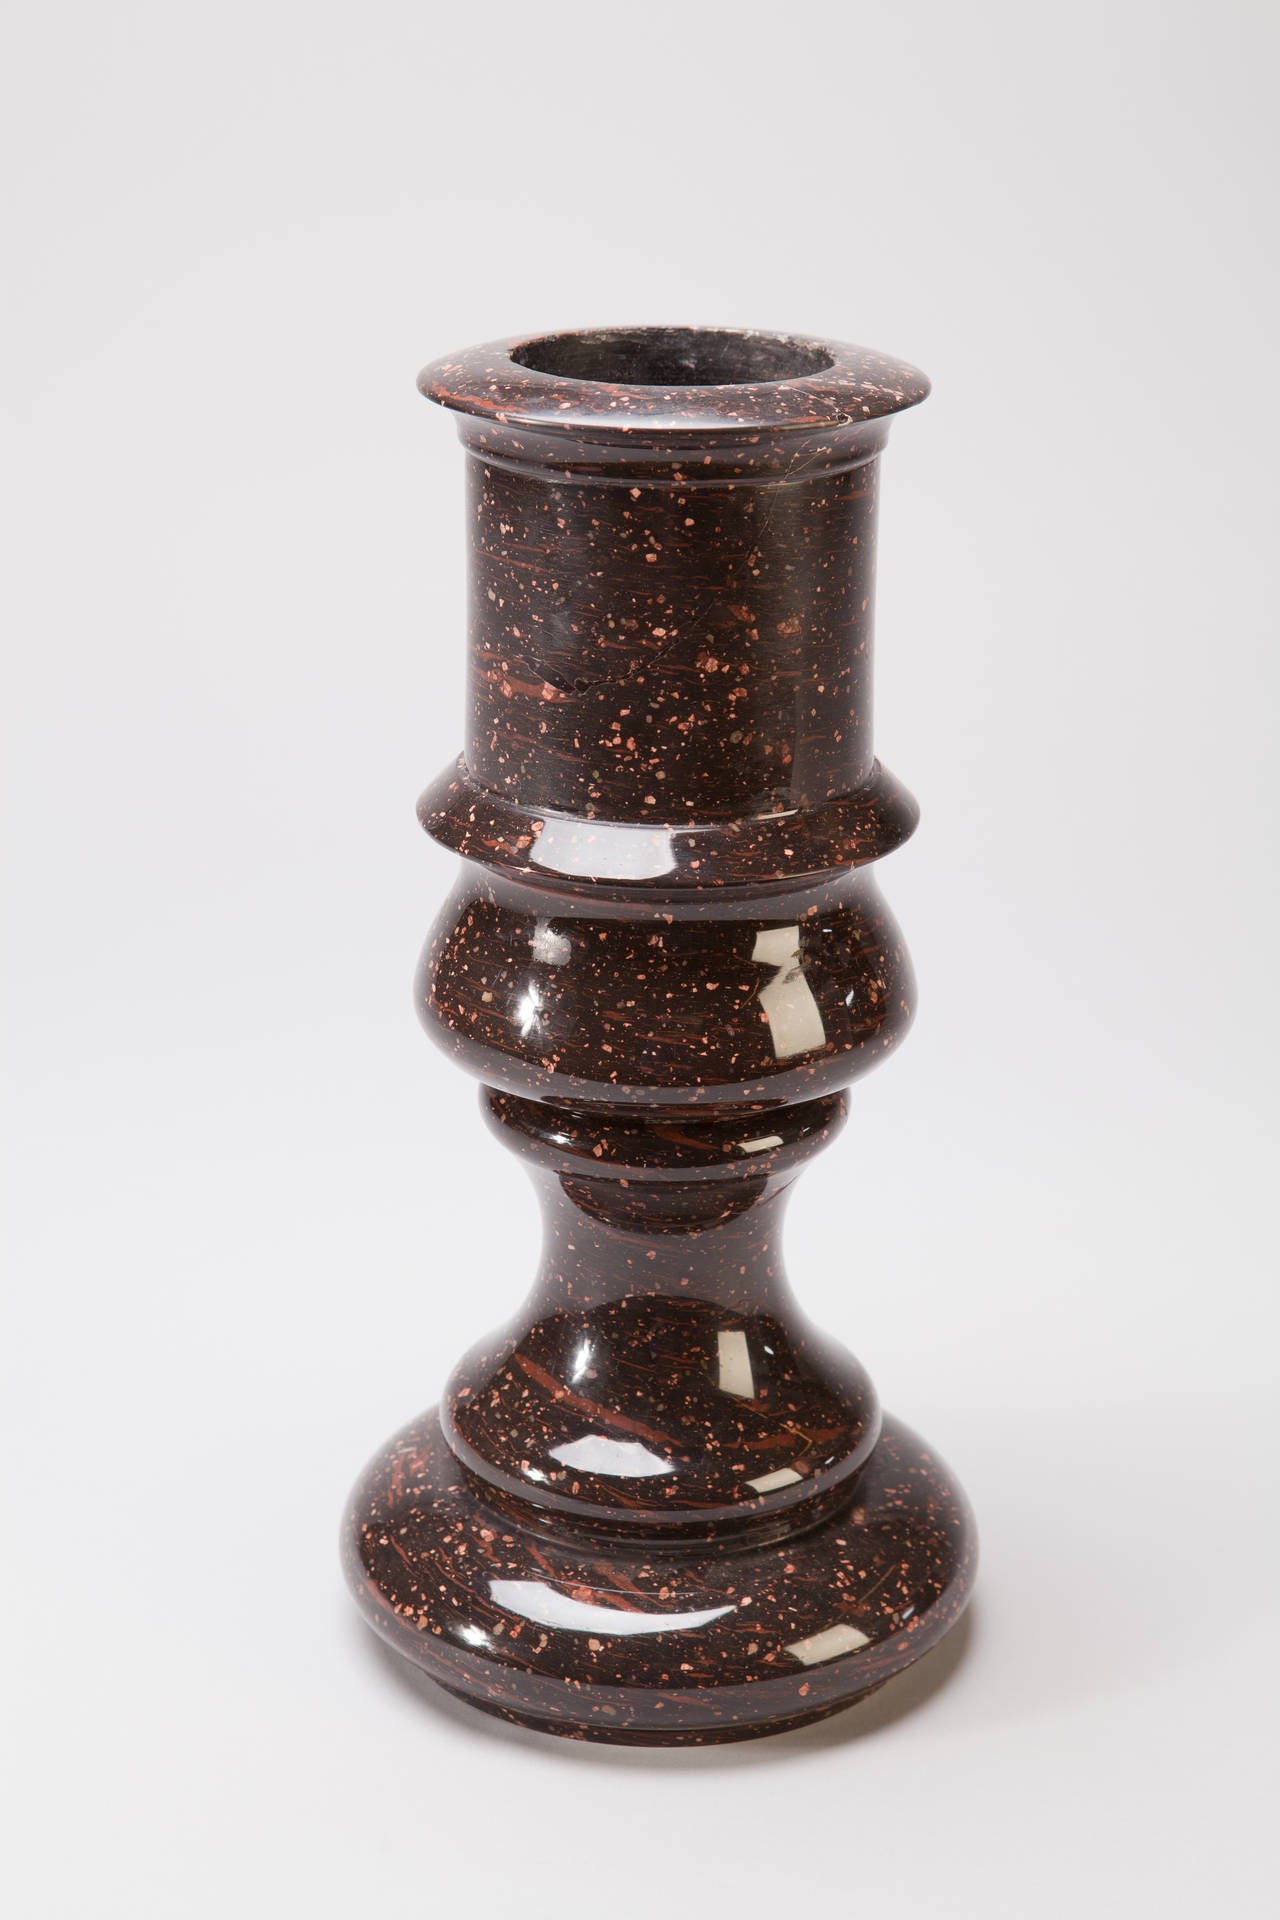 Neoclassical Early 19th Century Swedish Porphyry Bottle Cooler